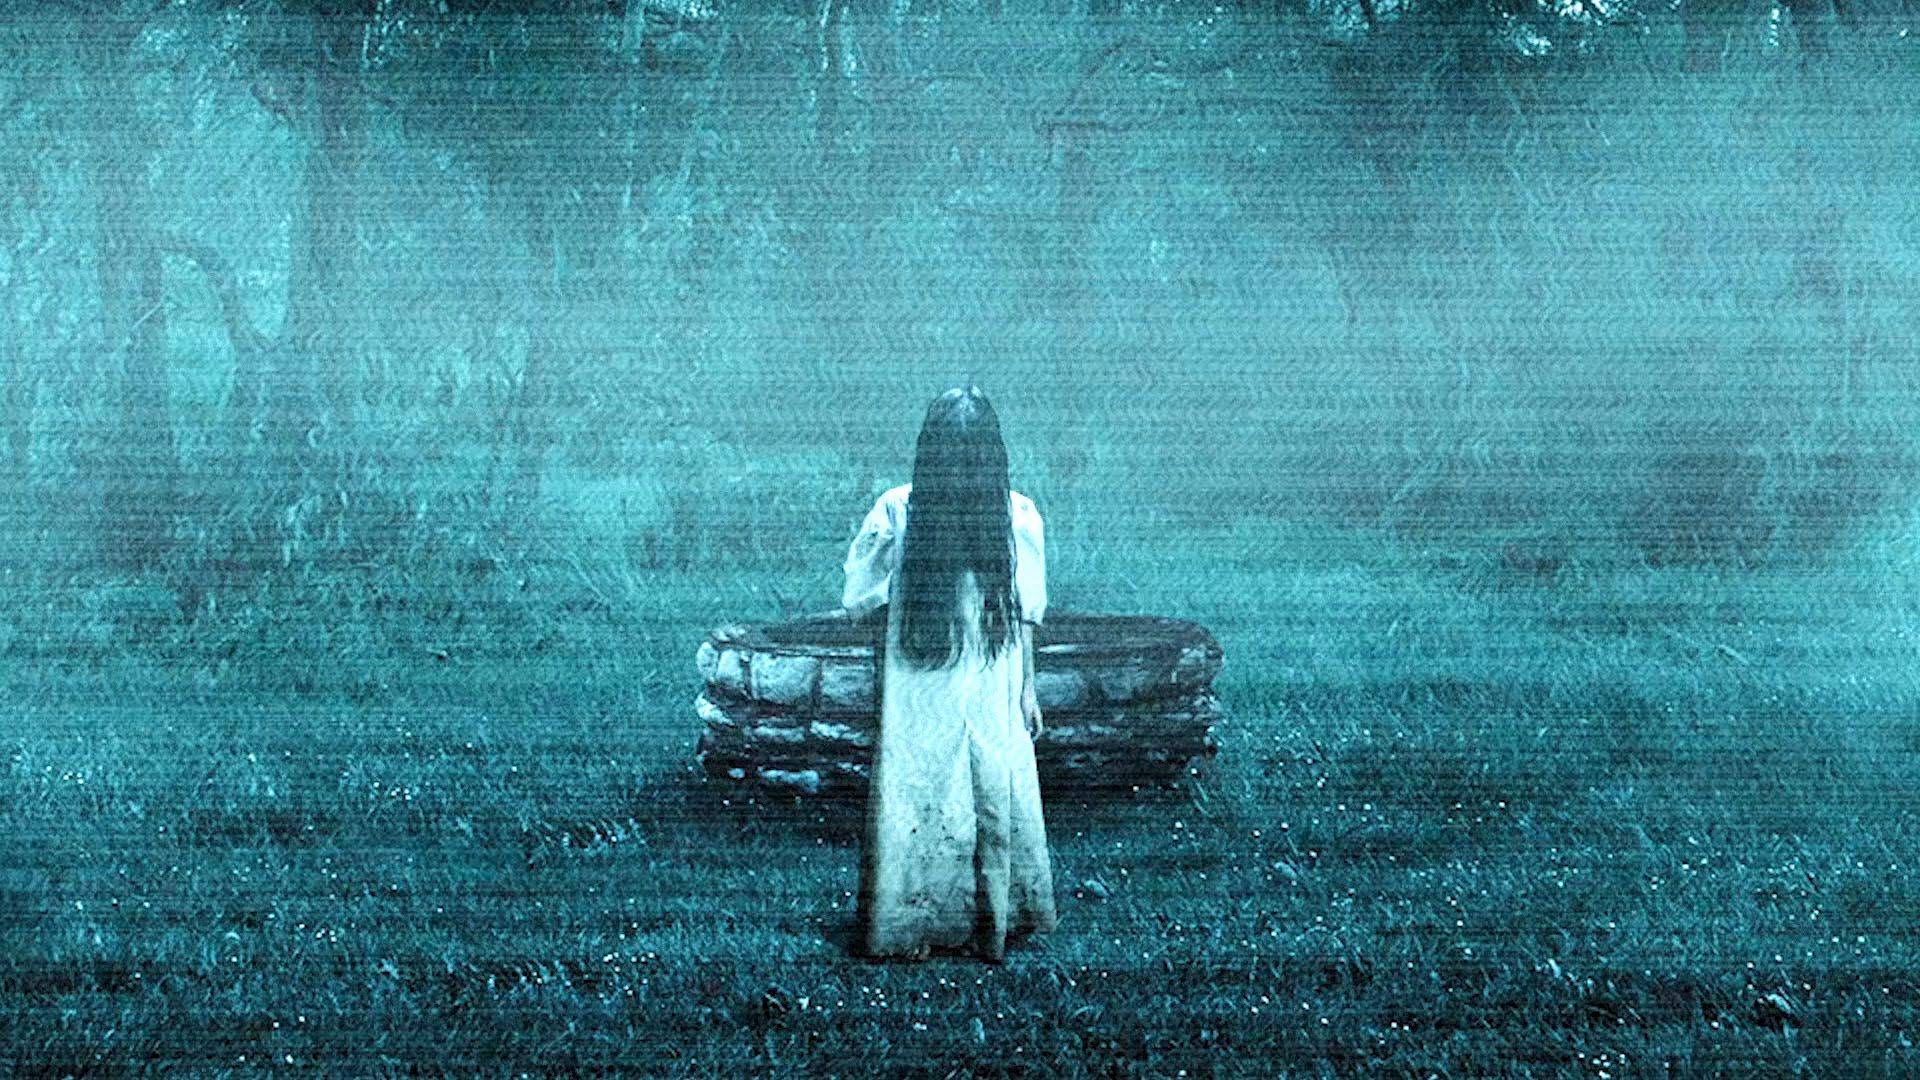 The Rings 3 (2017)